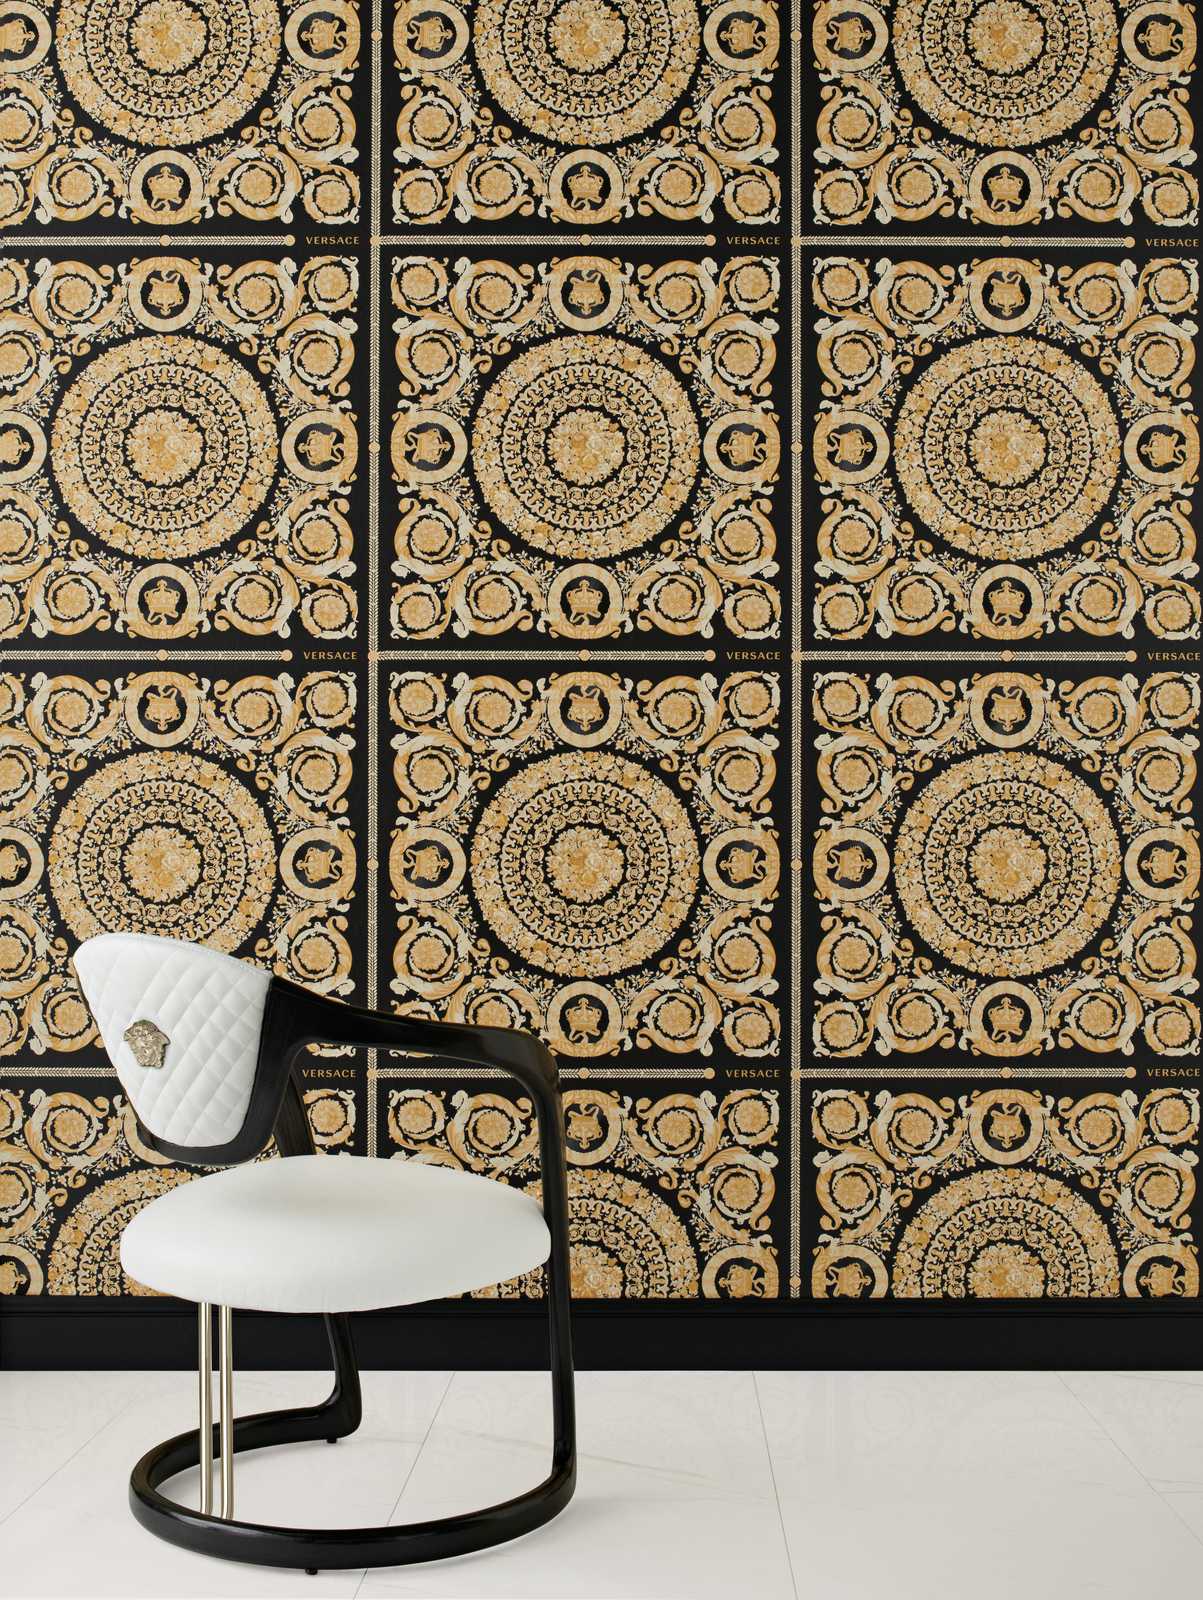             Luxury VERSACE Home wallpaper crowns & roses - black, gold, cream
        